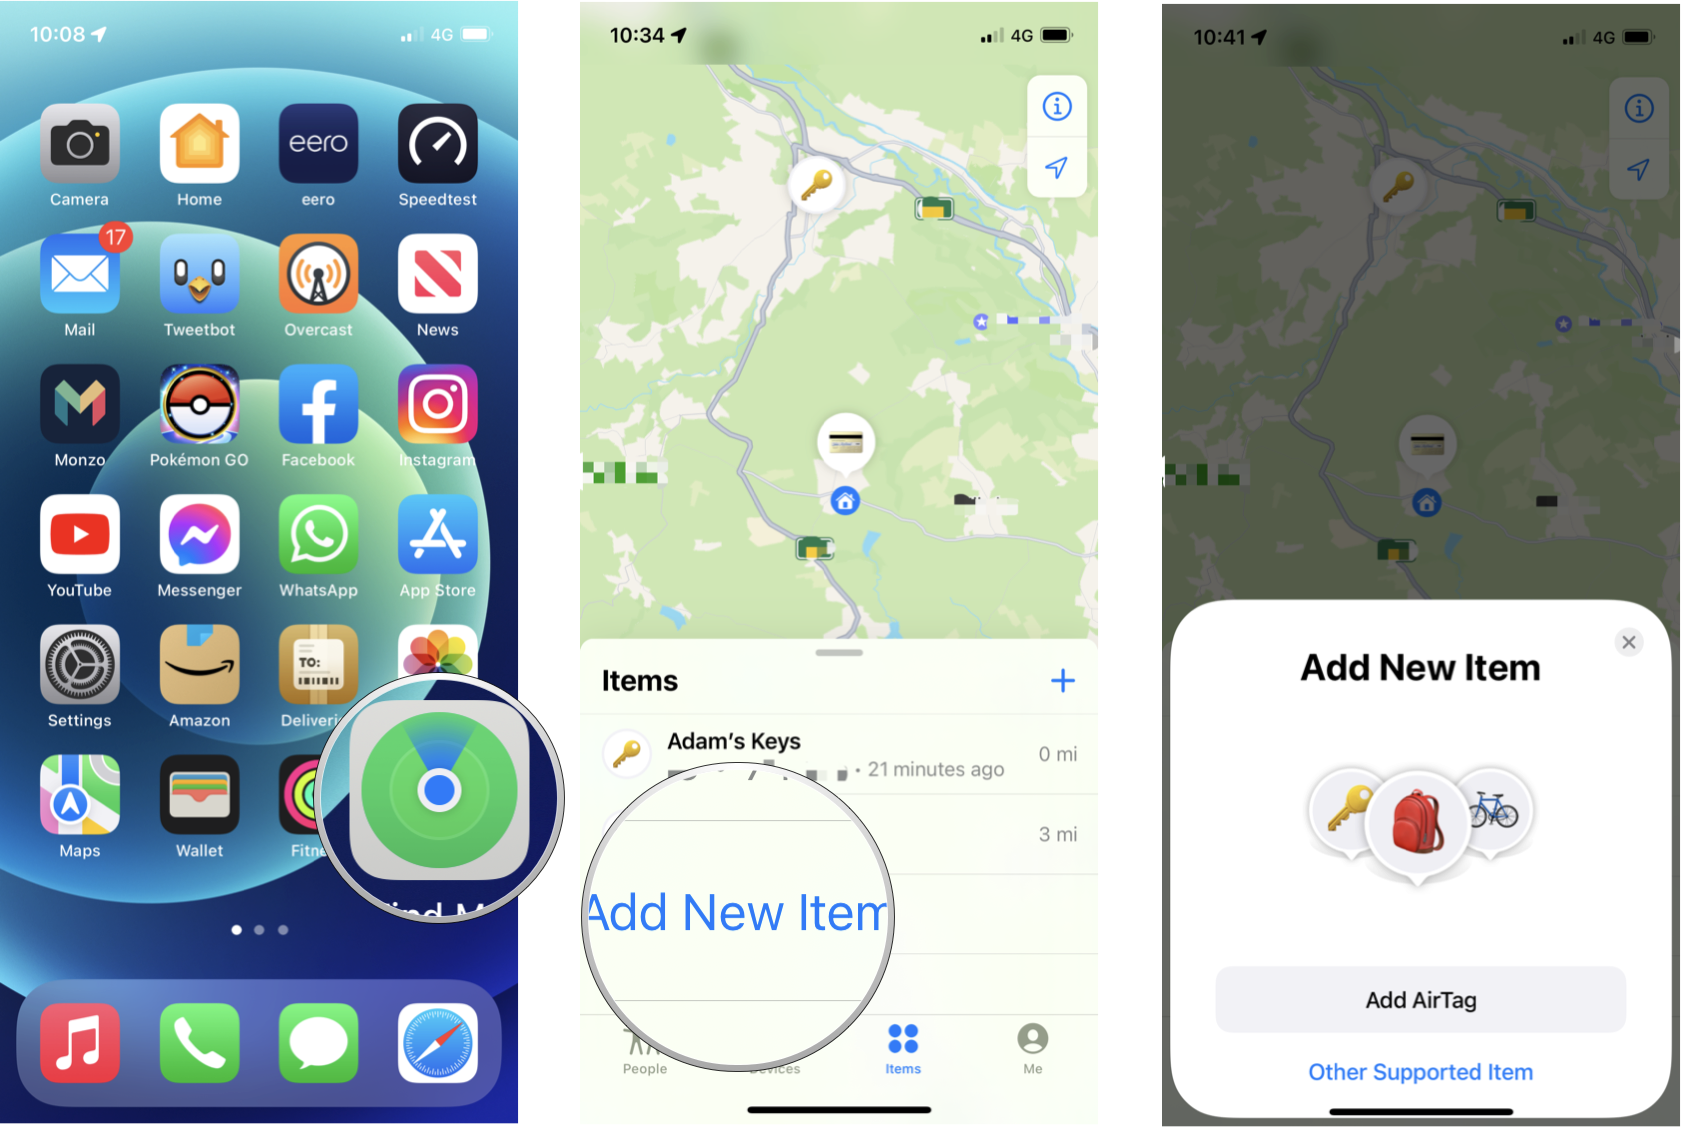 Track a third-party item with Find My support: Open Find My, tap Items, tap Add New Item, tap Other Supported Item